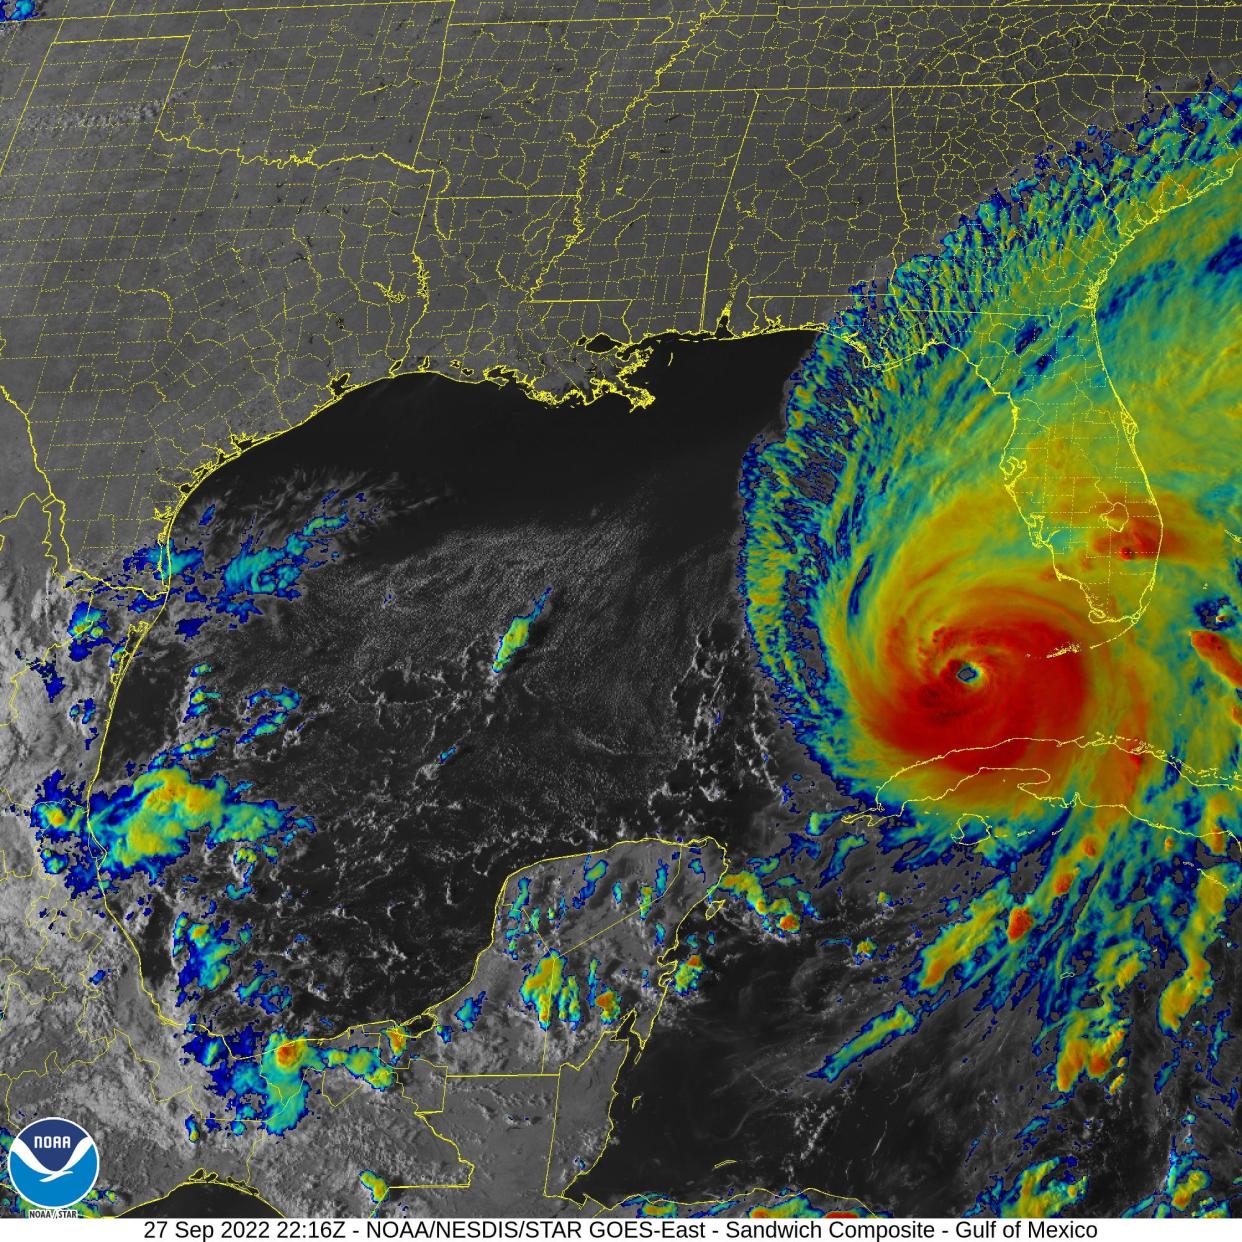 Hurricane Ian as seen in this infrared GOES satellite view on the evening of Sept. 27, 2022.